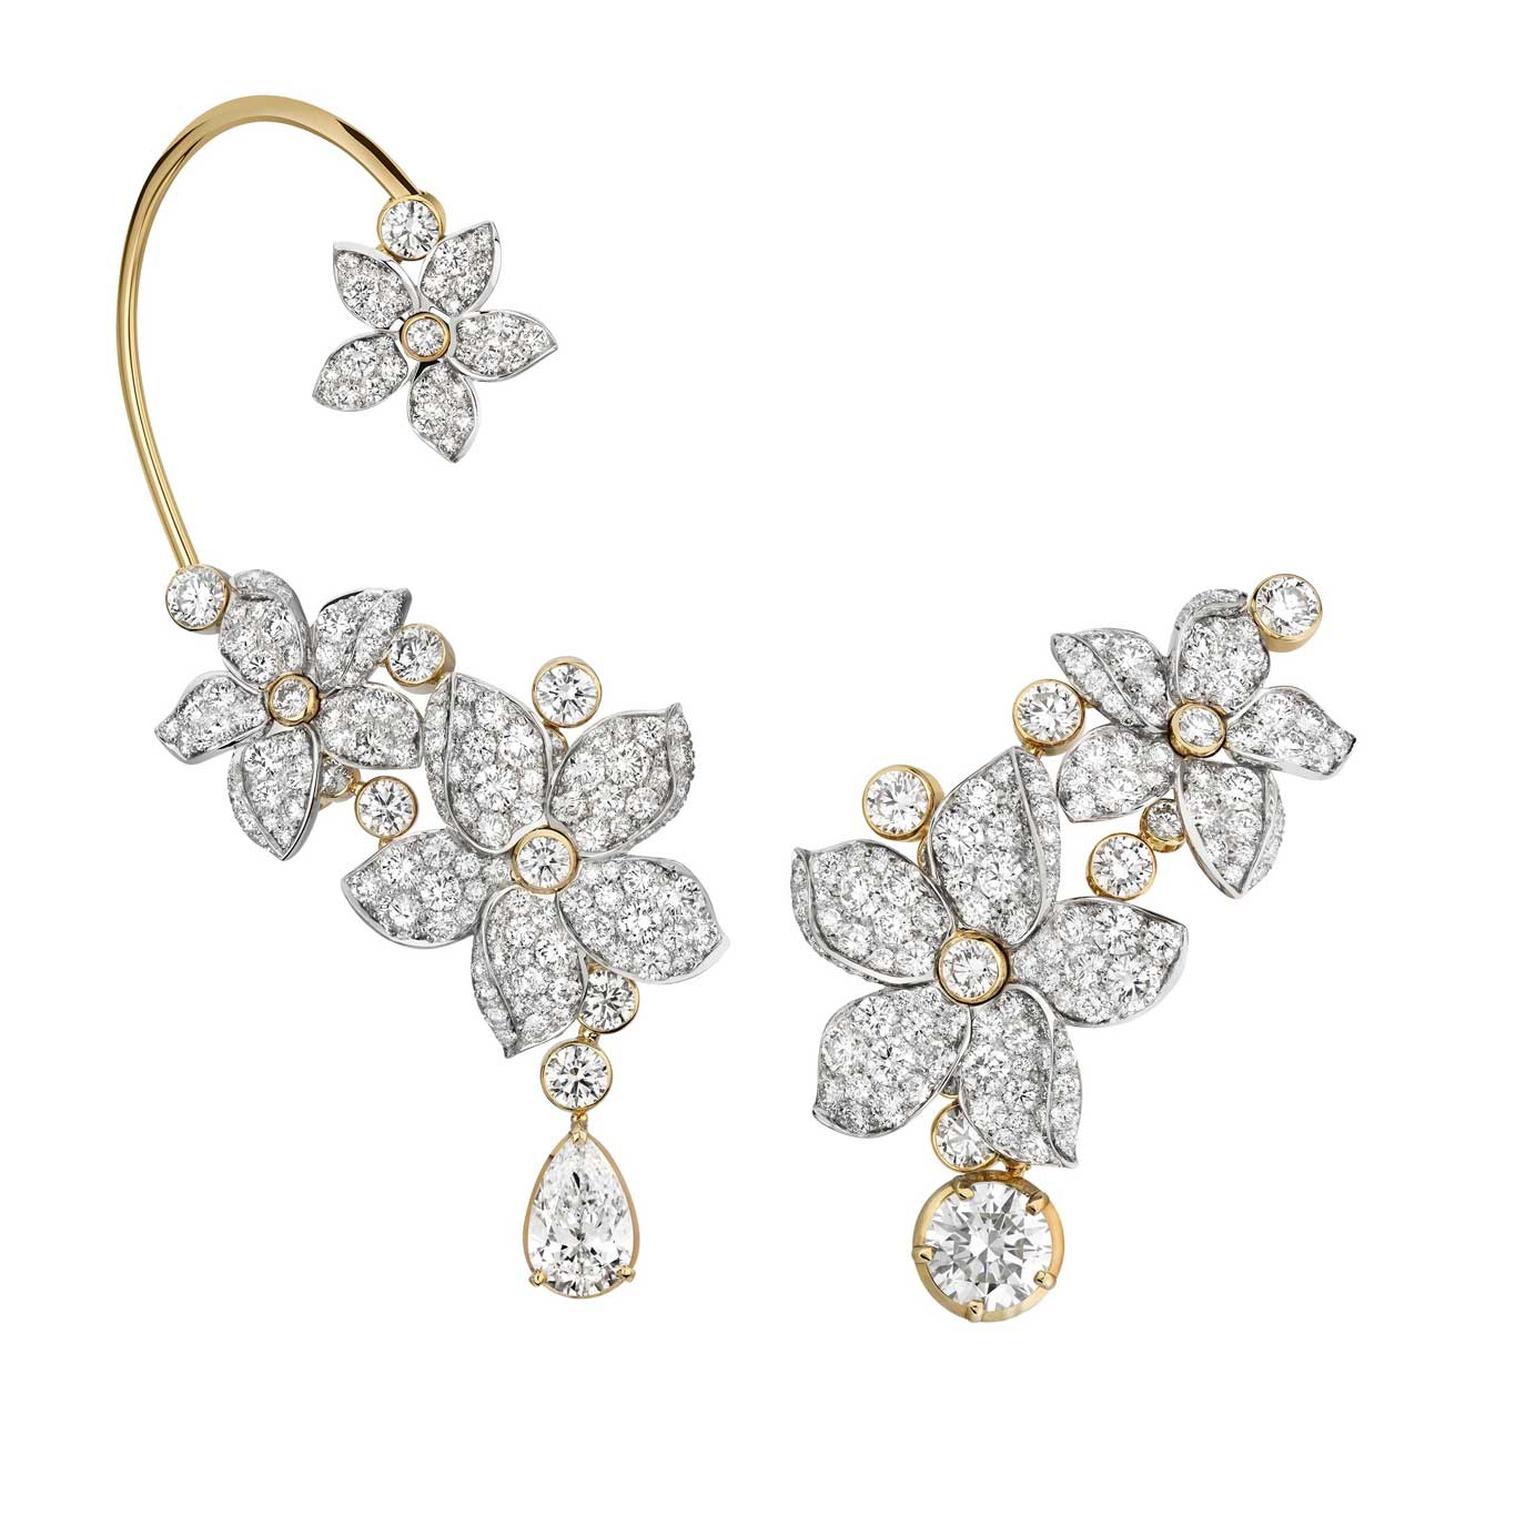 Chanel Collection No 5 GRASSE JASMINE asymmetrical earrings